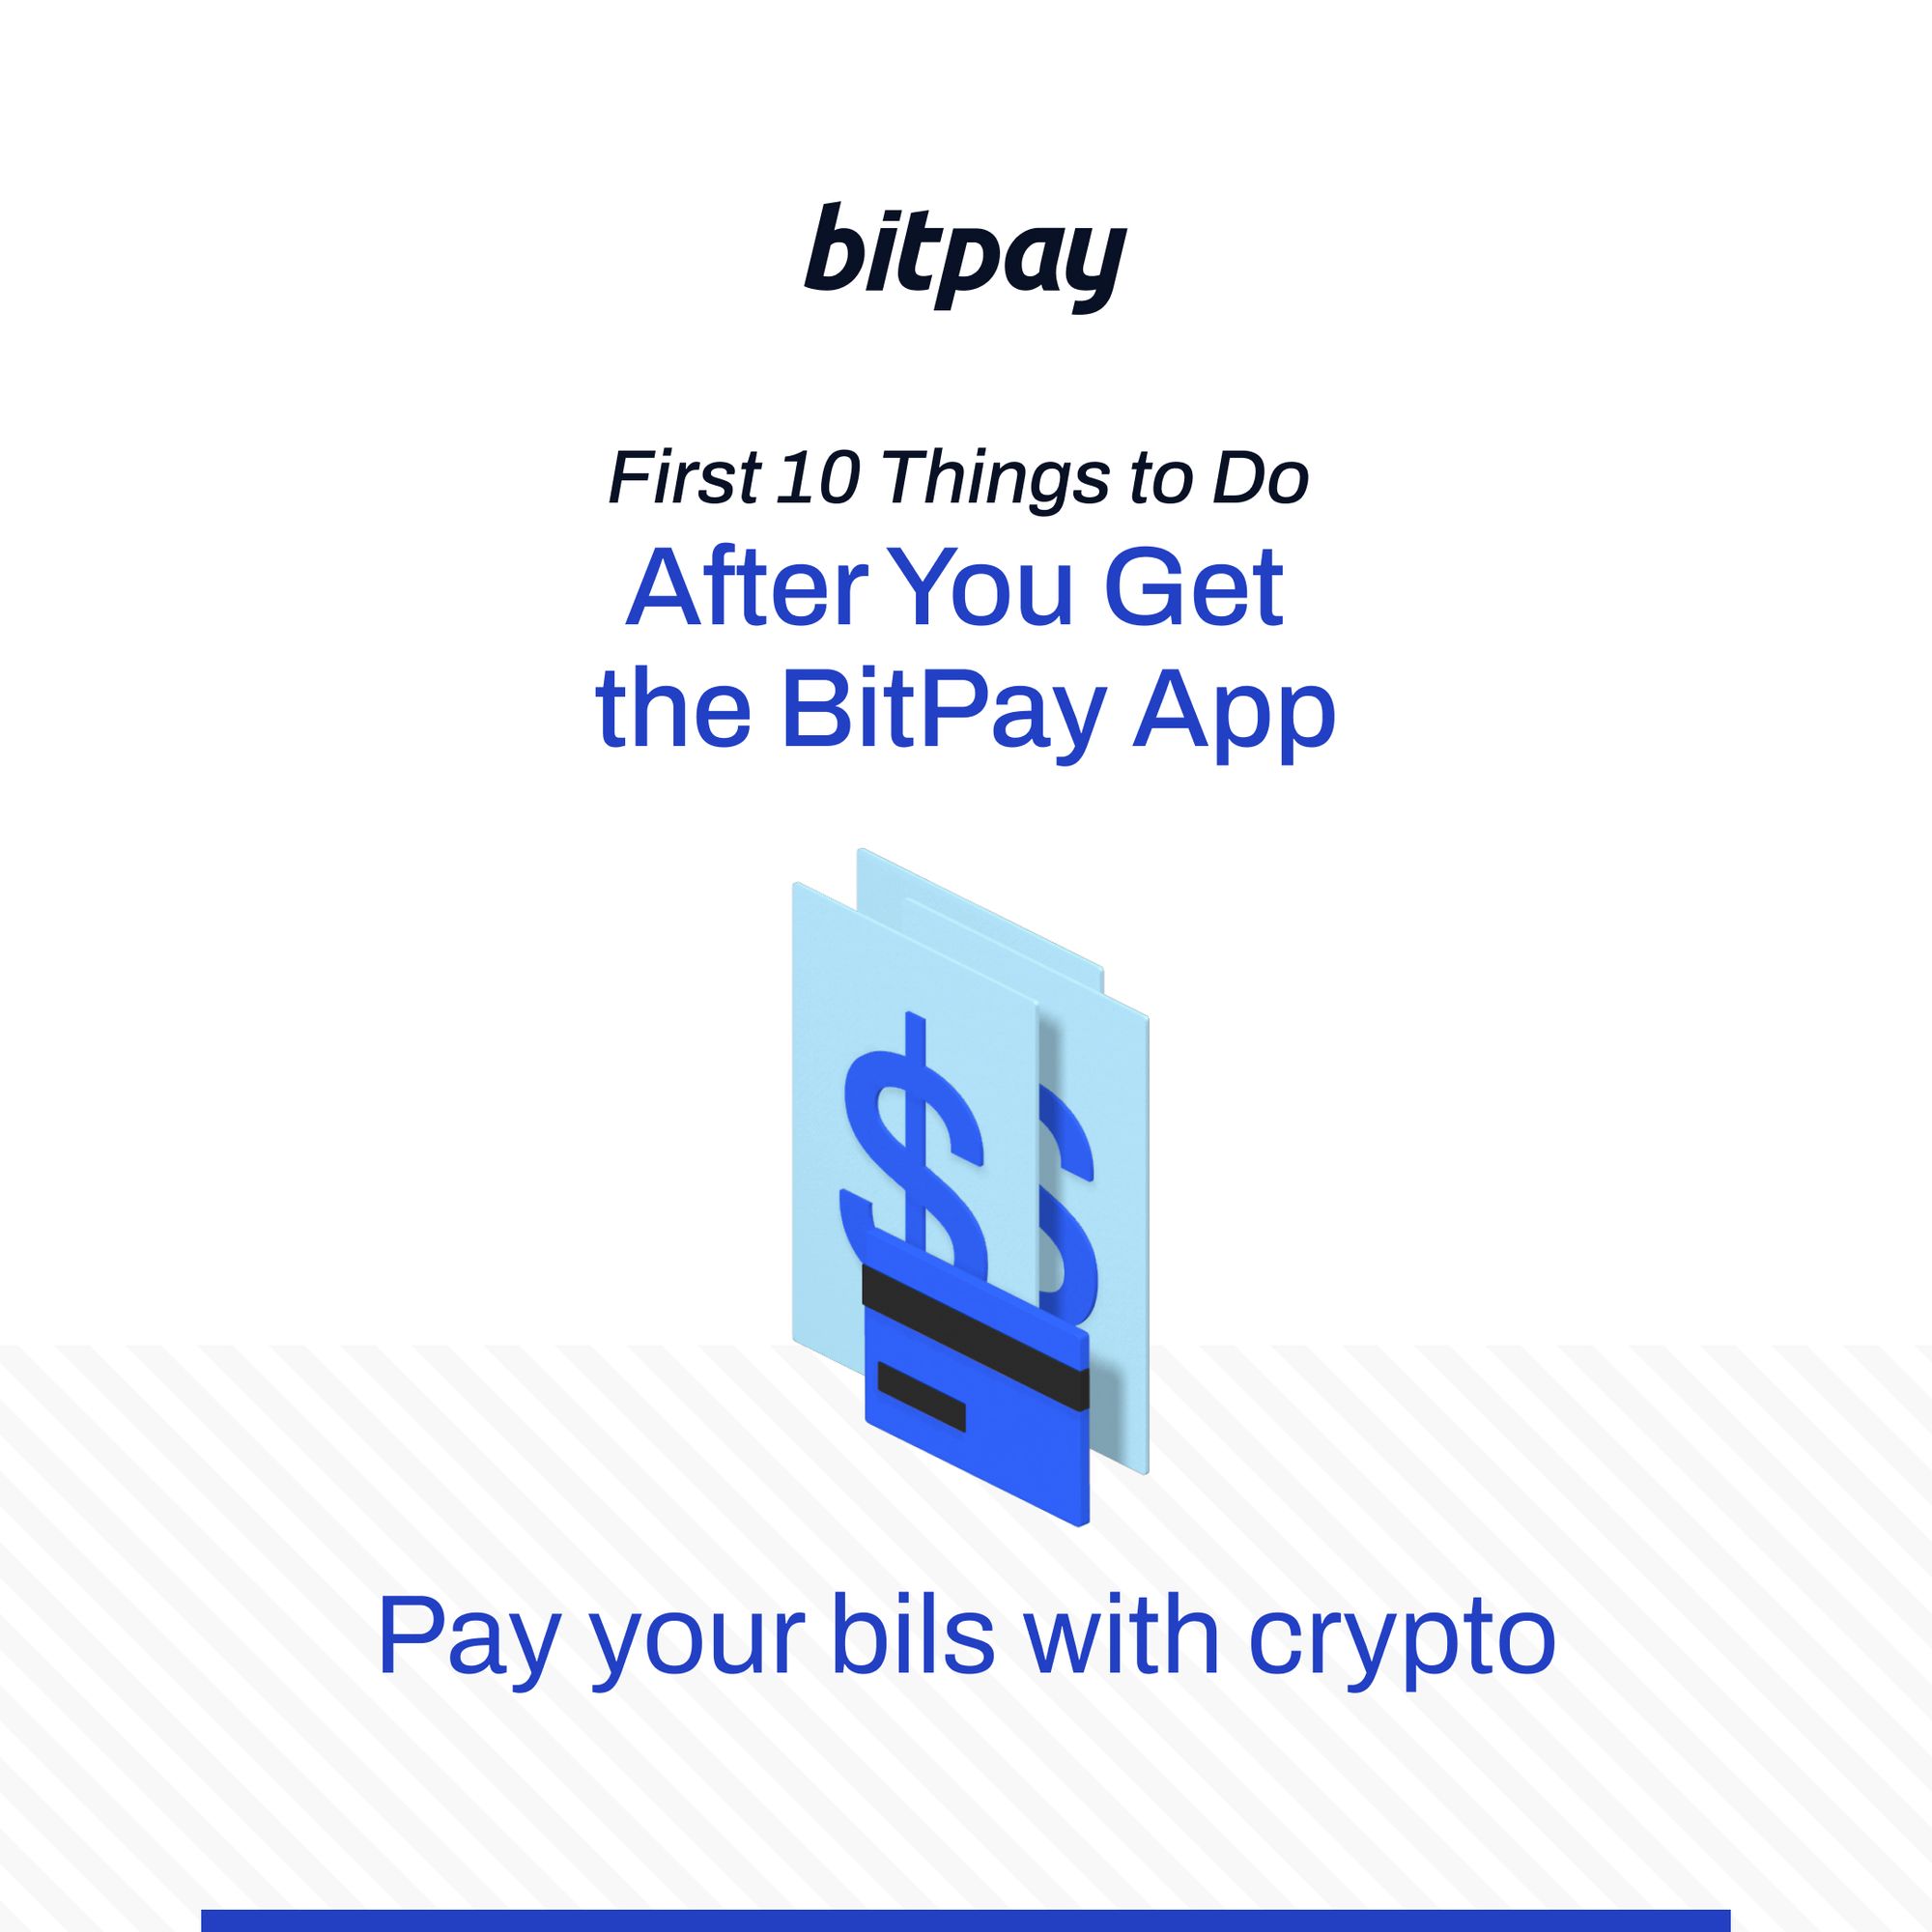 First 10 Things to Do After You Get the BitPay Wallet App